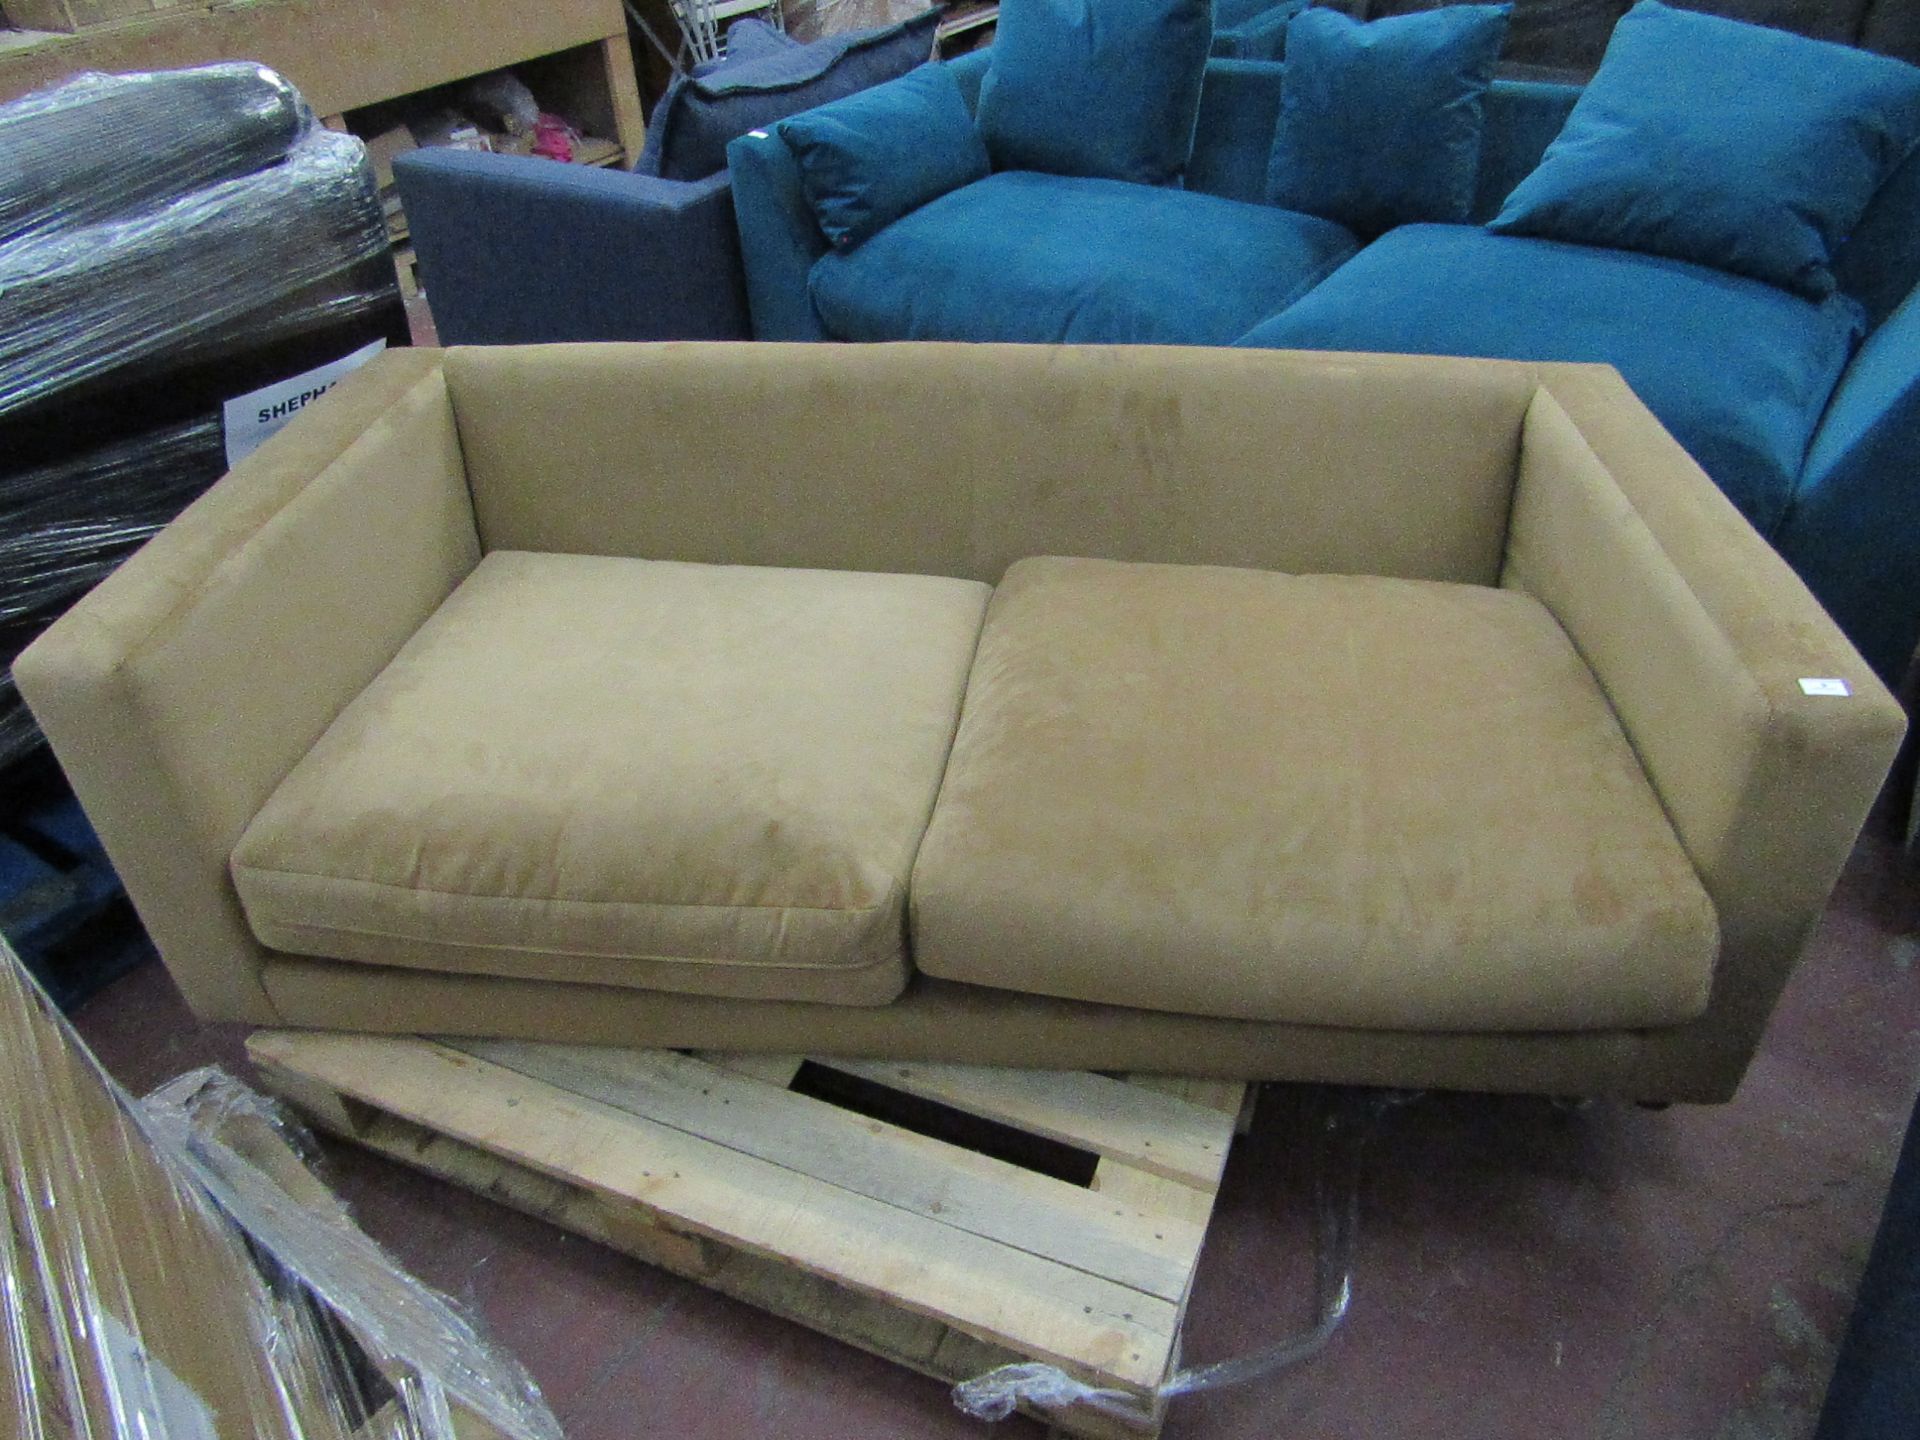 | 1x | SWOON VELOUR 2 SEATER SOFA | HAS NO FEET,NEEDS A CLEAN AND THE BACK CUSHIONS ARE MISSING